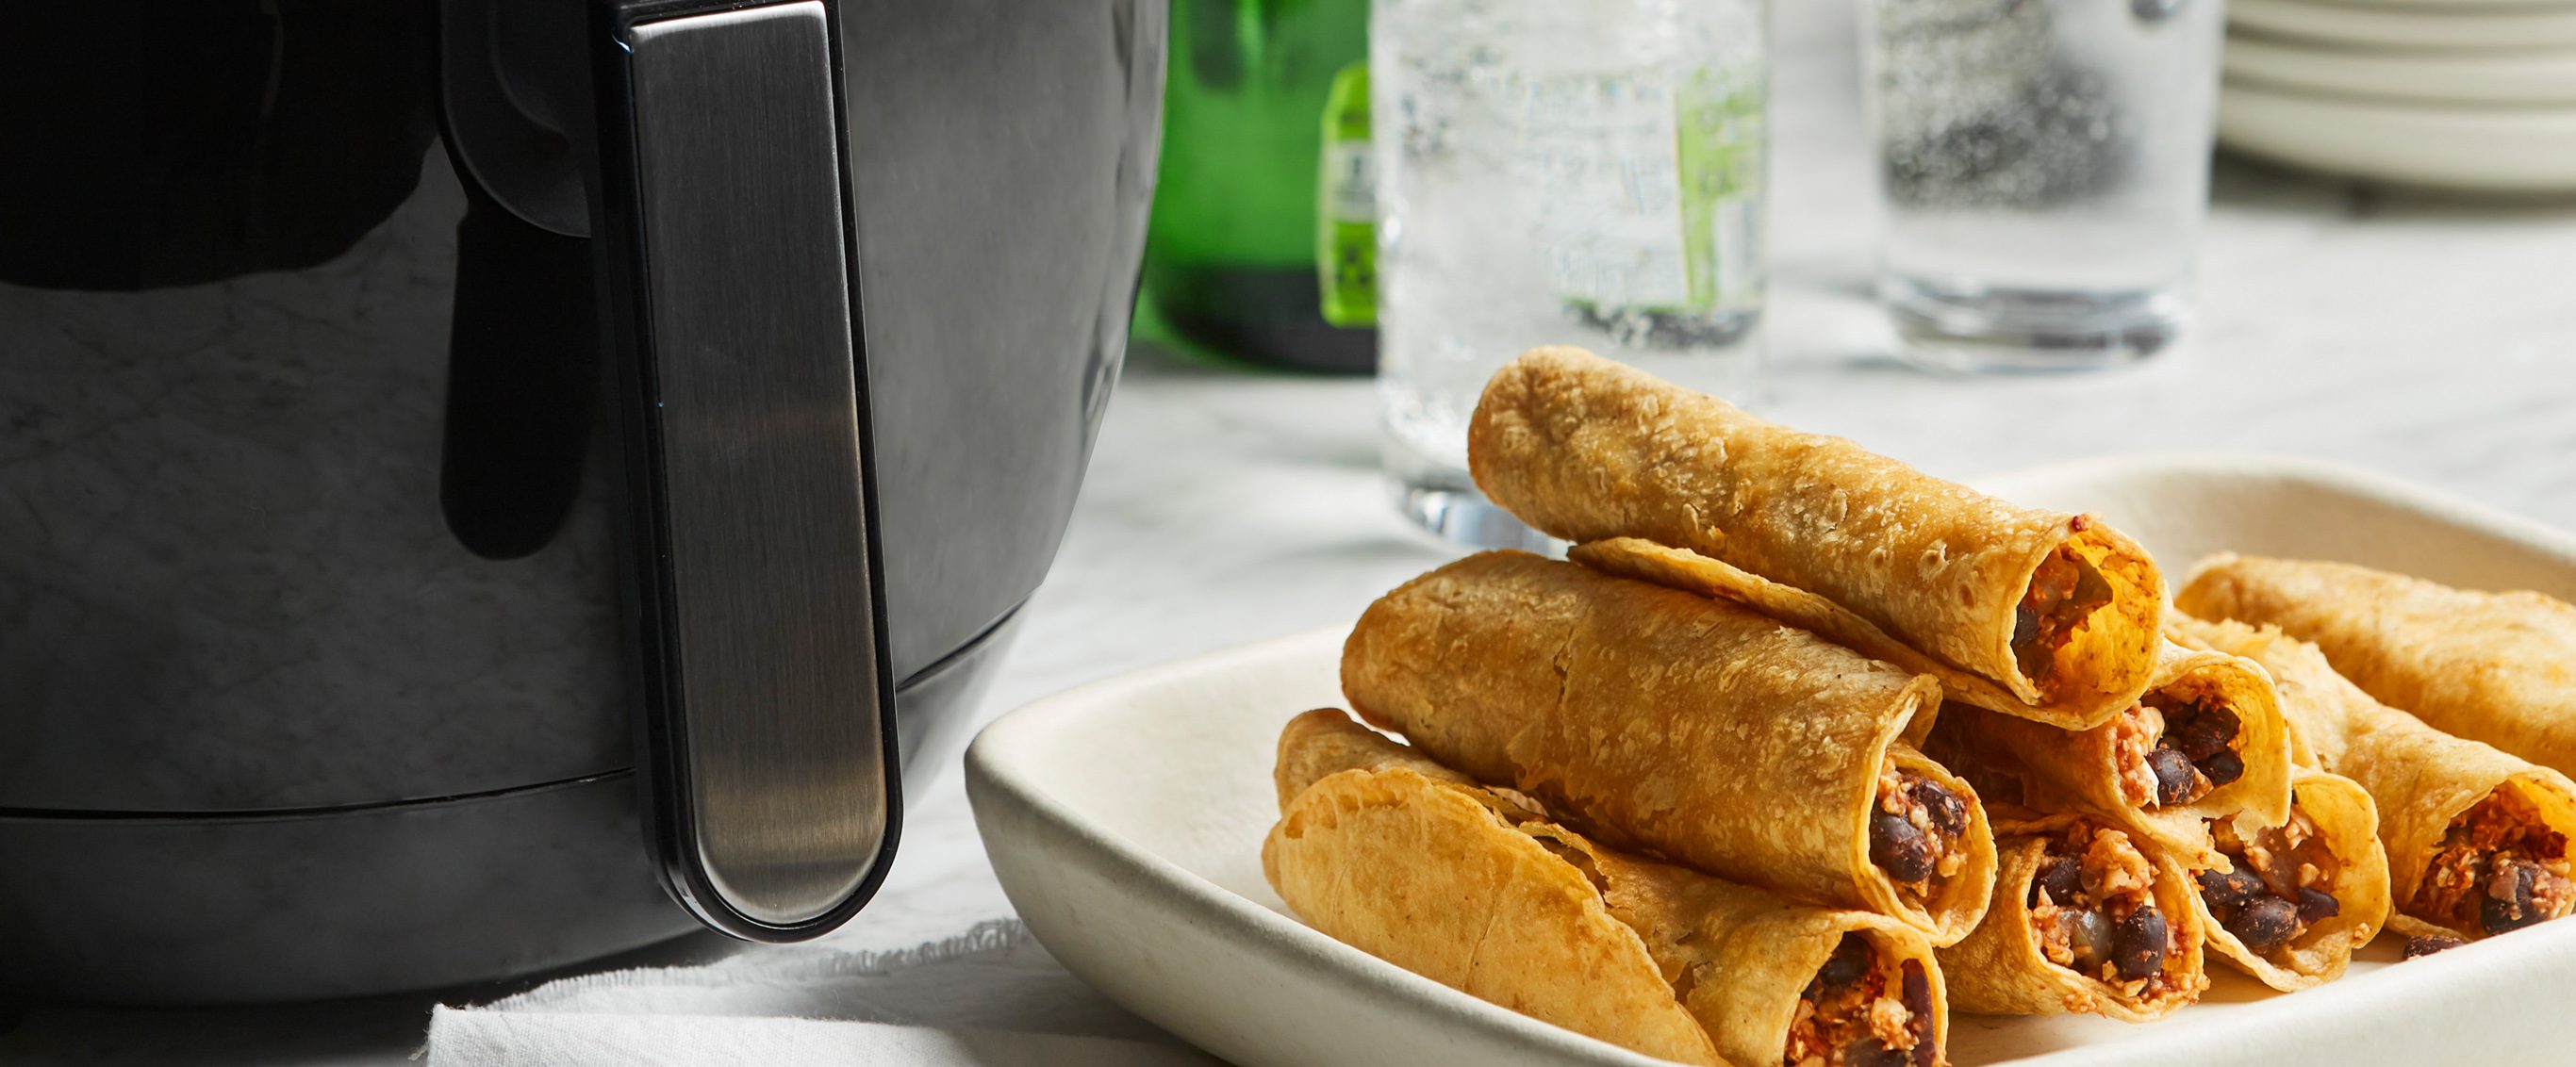 The Easy BLACK+DECKER Air Fryer Cookbook: Delicious Frying Recipes